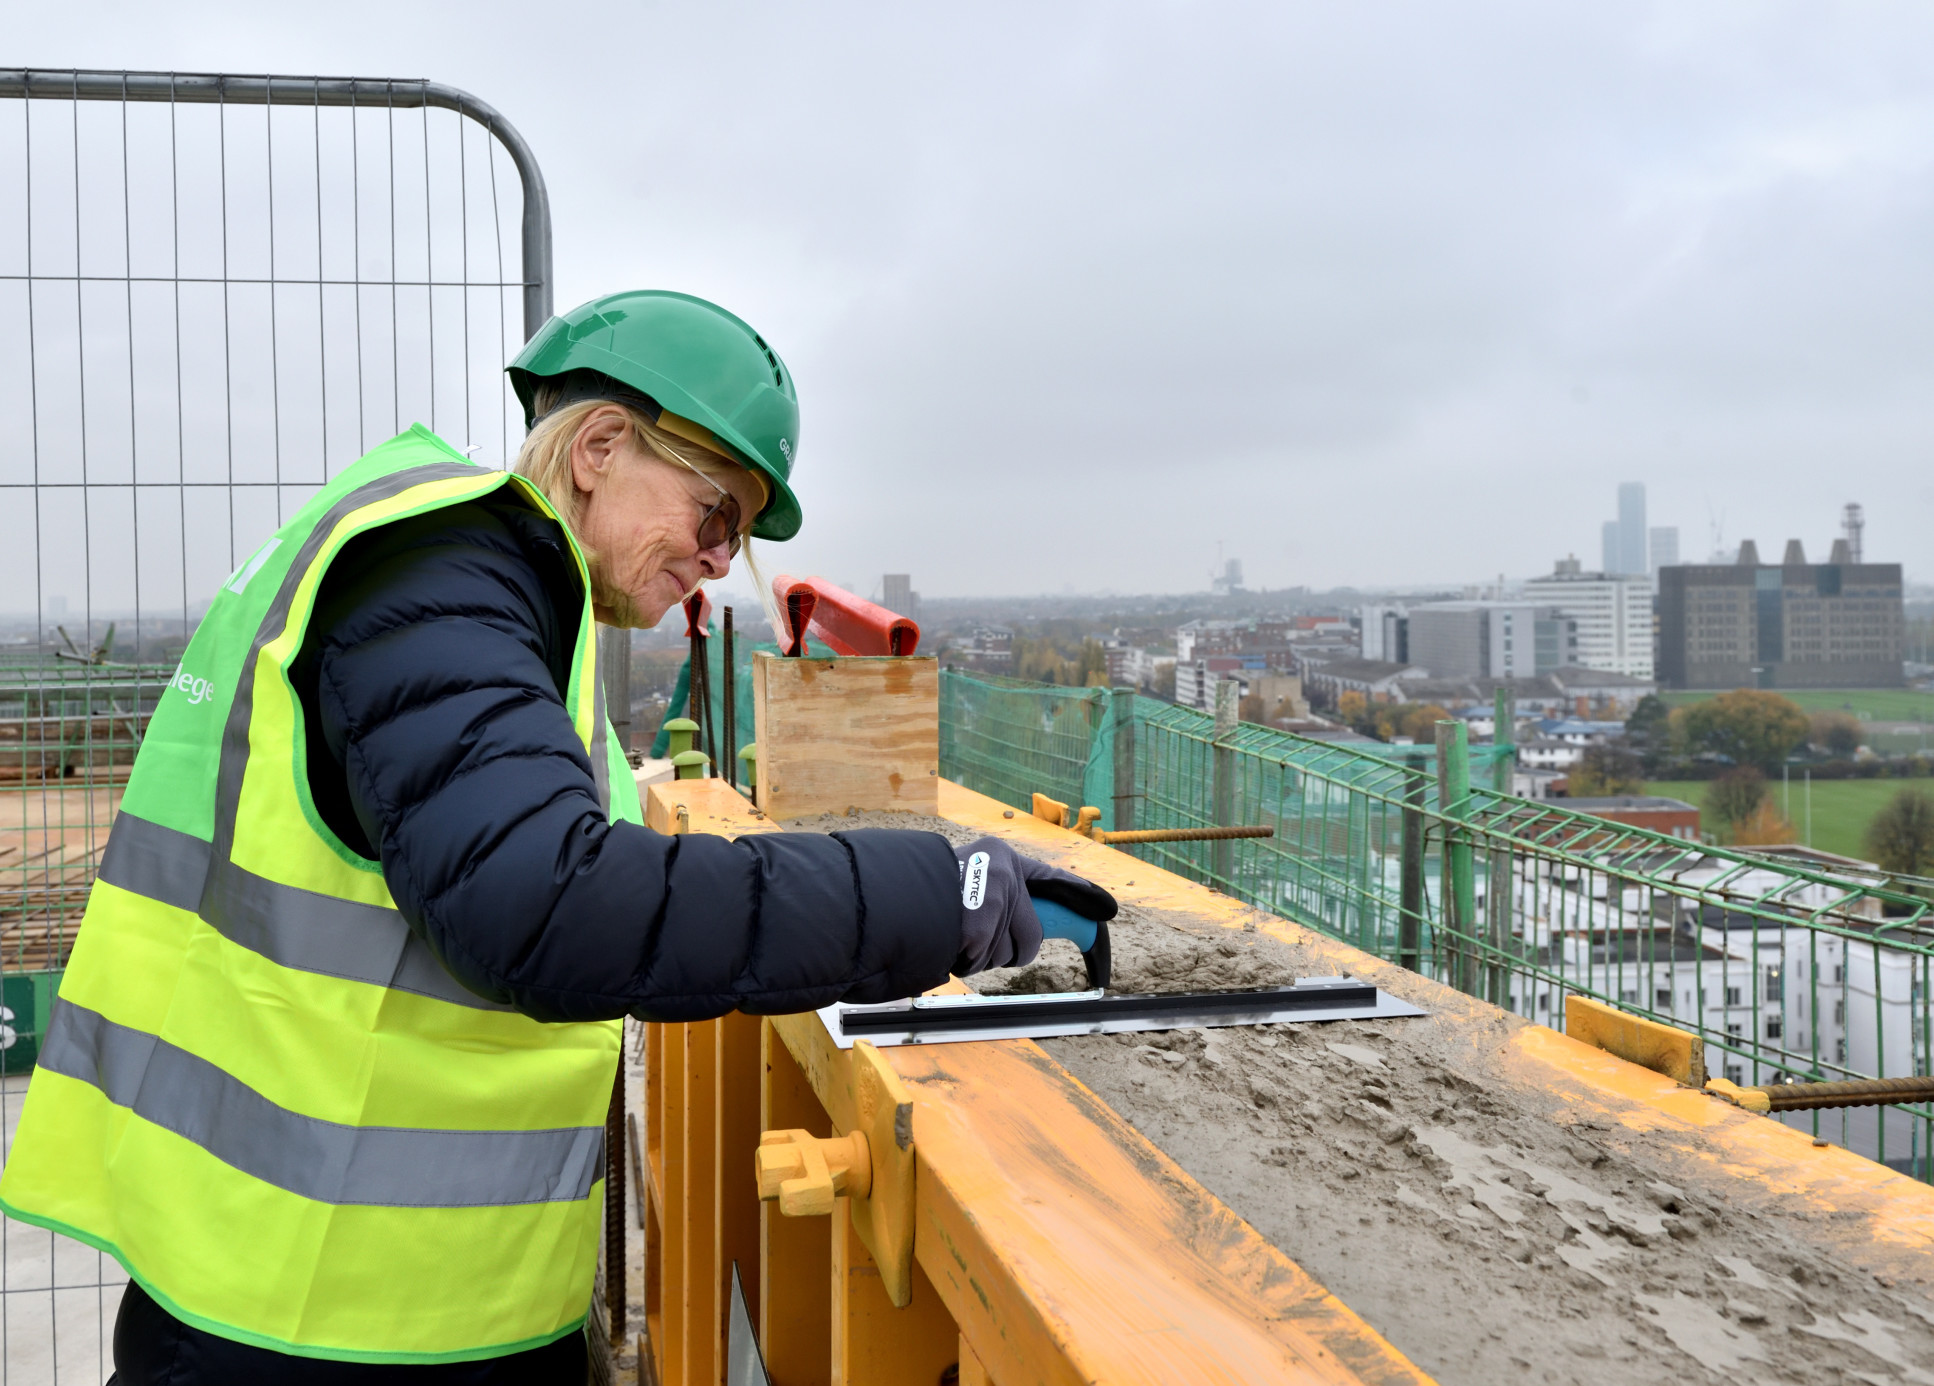 Imperial donor and alumnus Marit Mohn applies mortaring on the roof of the new School of Public Health building